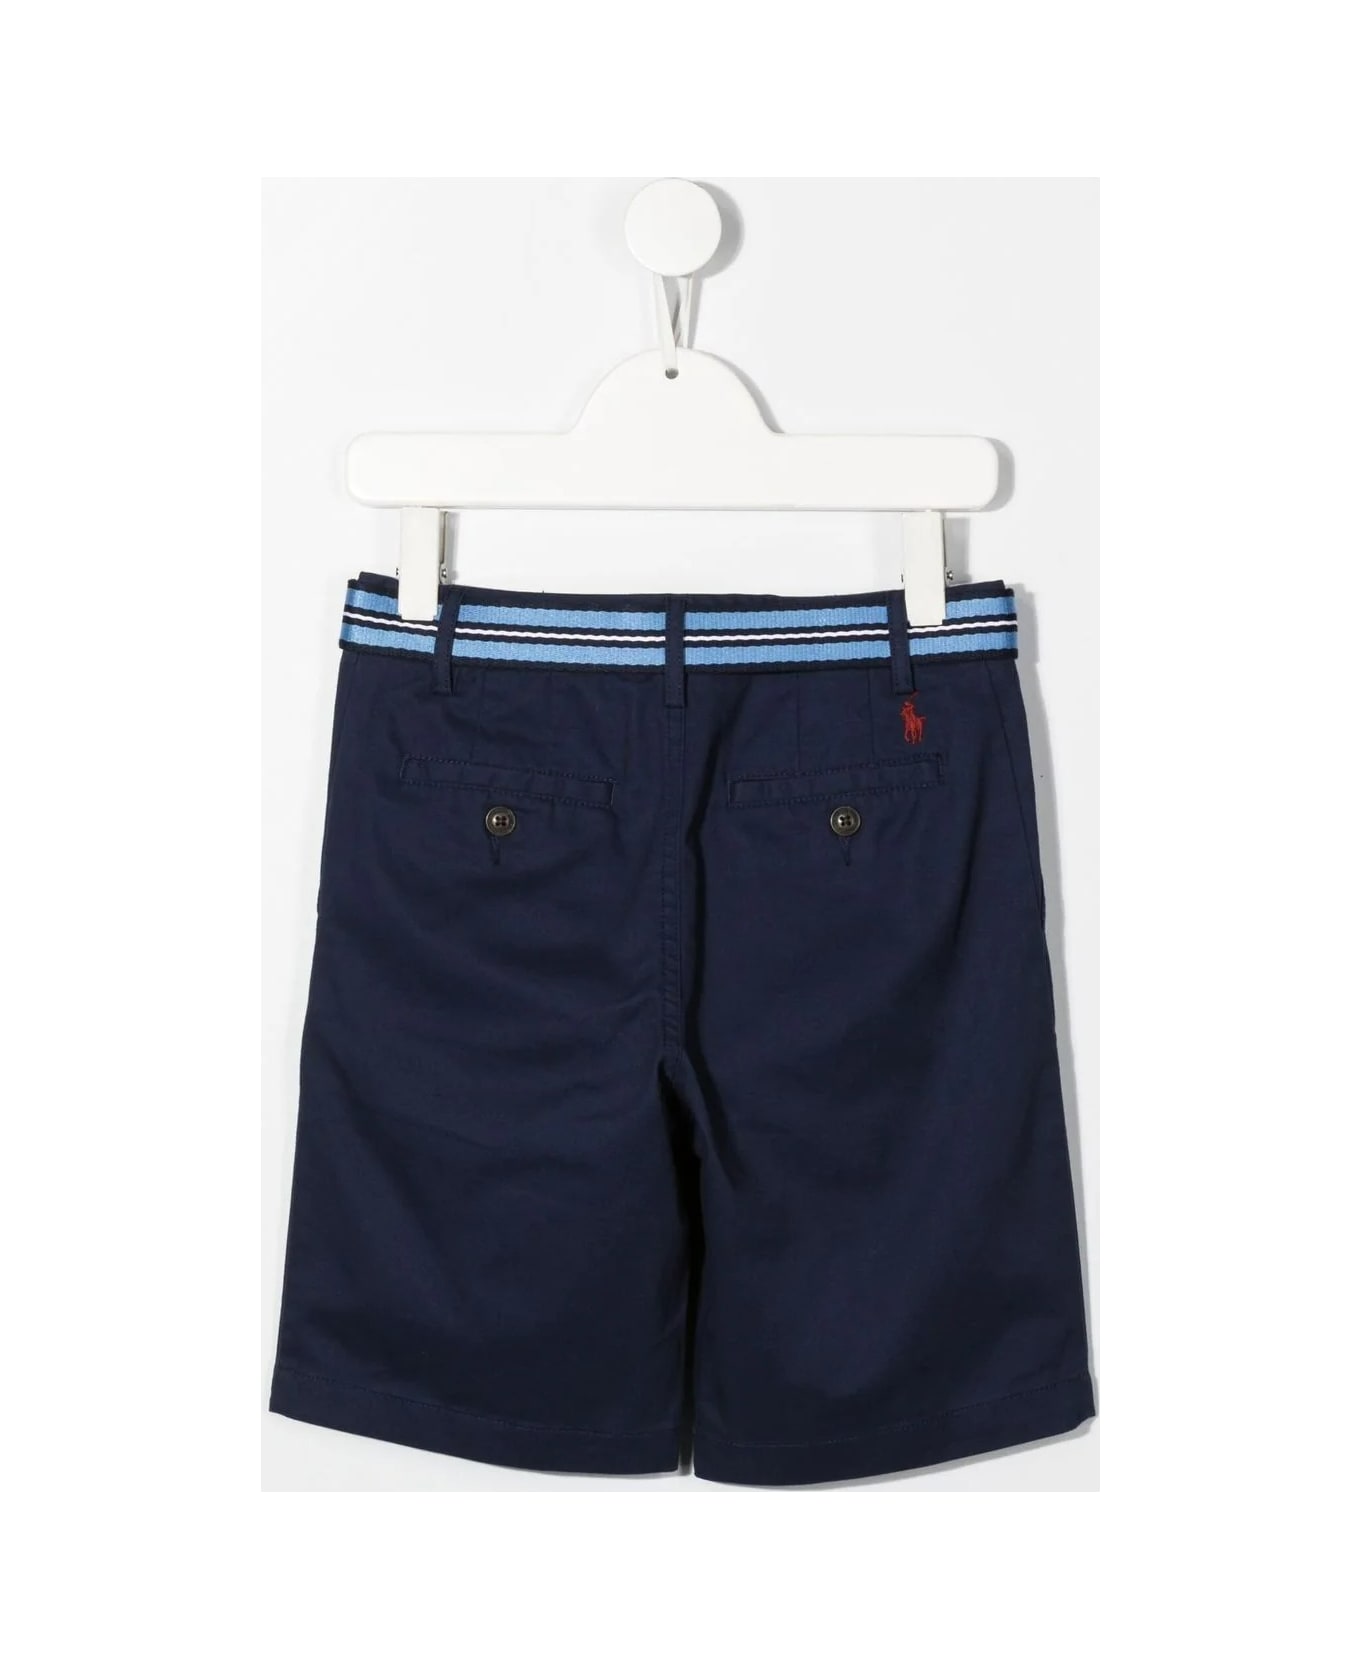 Ralph Lauren Shorts In Navy Blue Stretch Chino With Belt - Navy ボトムス